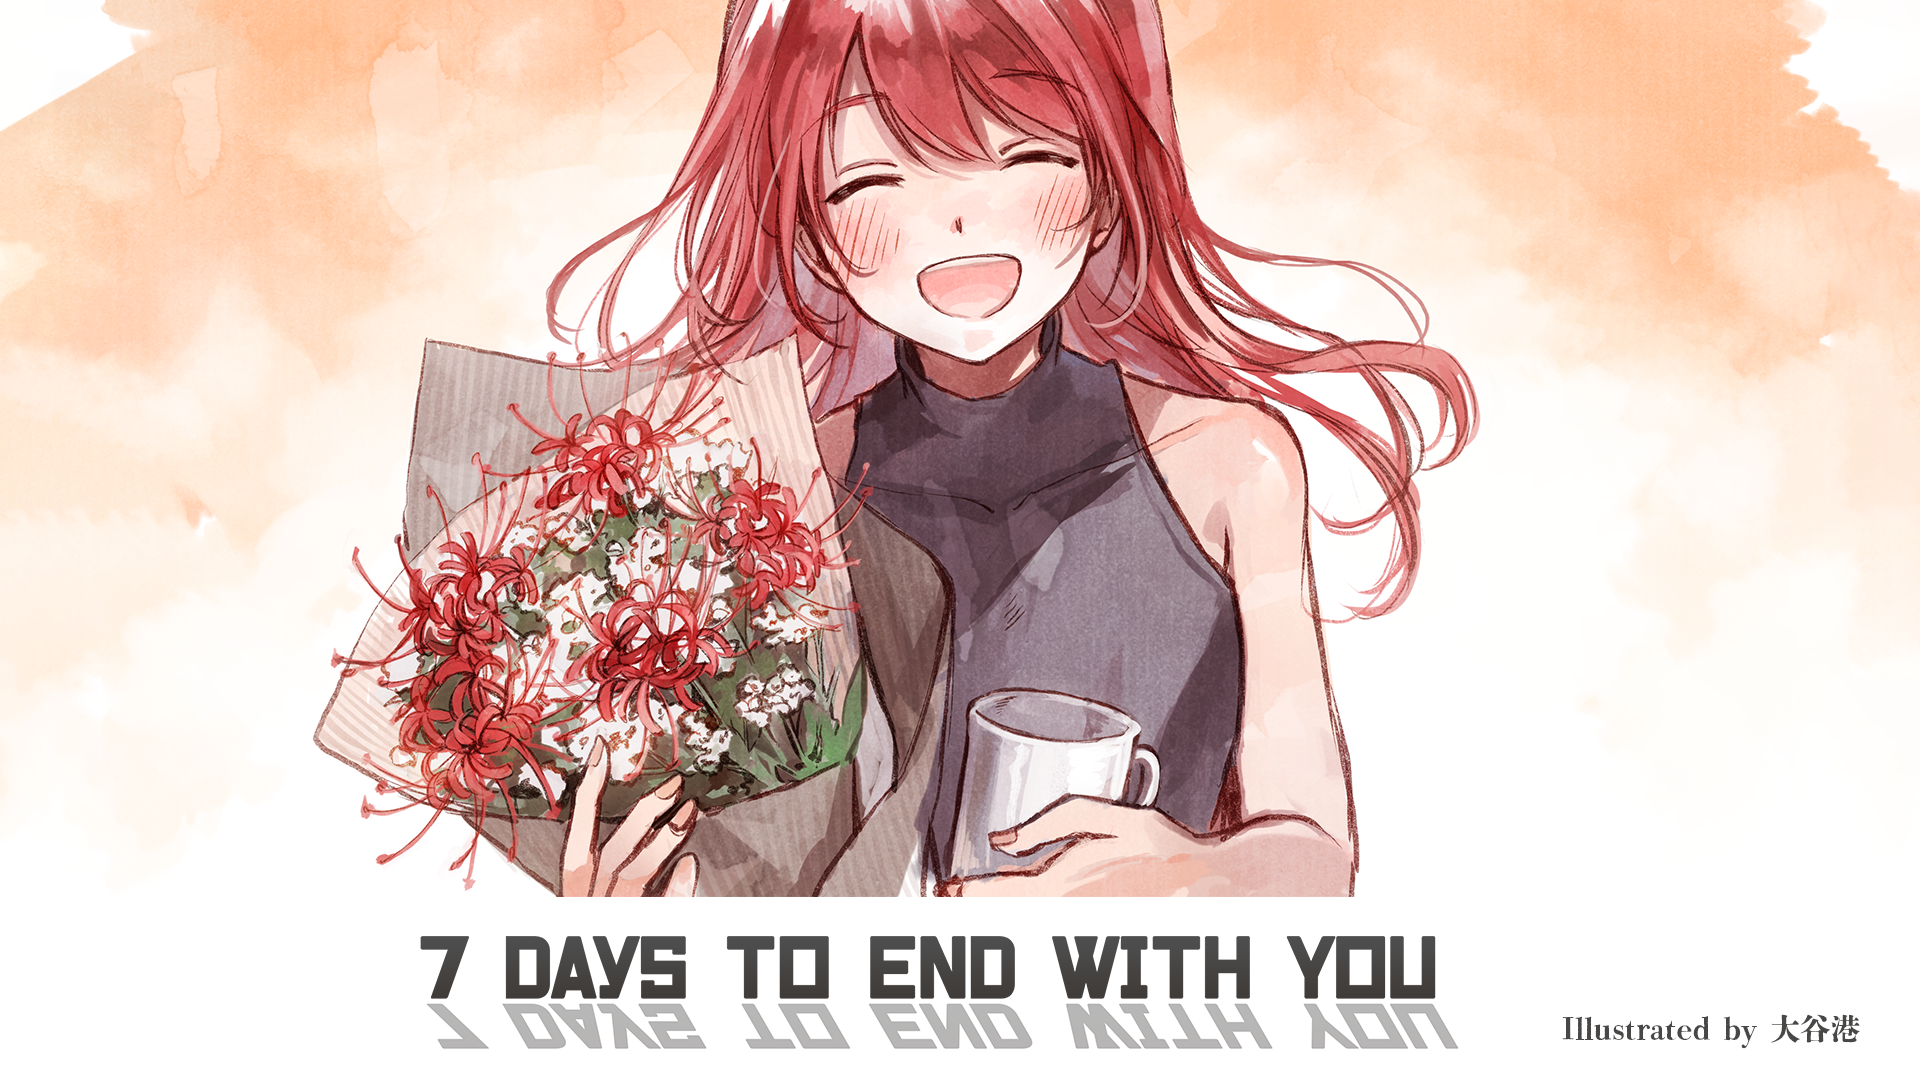 7 Days to End with You Out on Nintendo Switch & Major Steam Update! Review Keys Available!